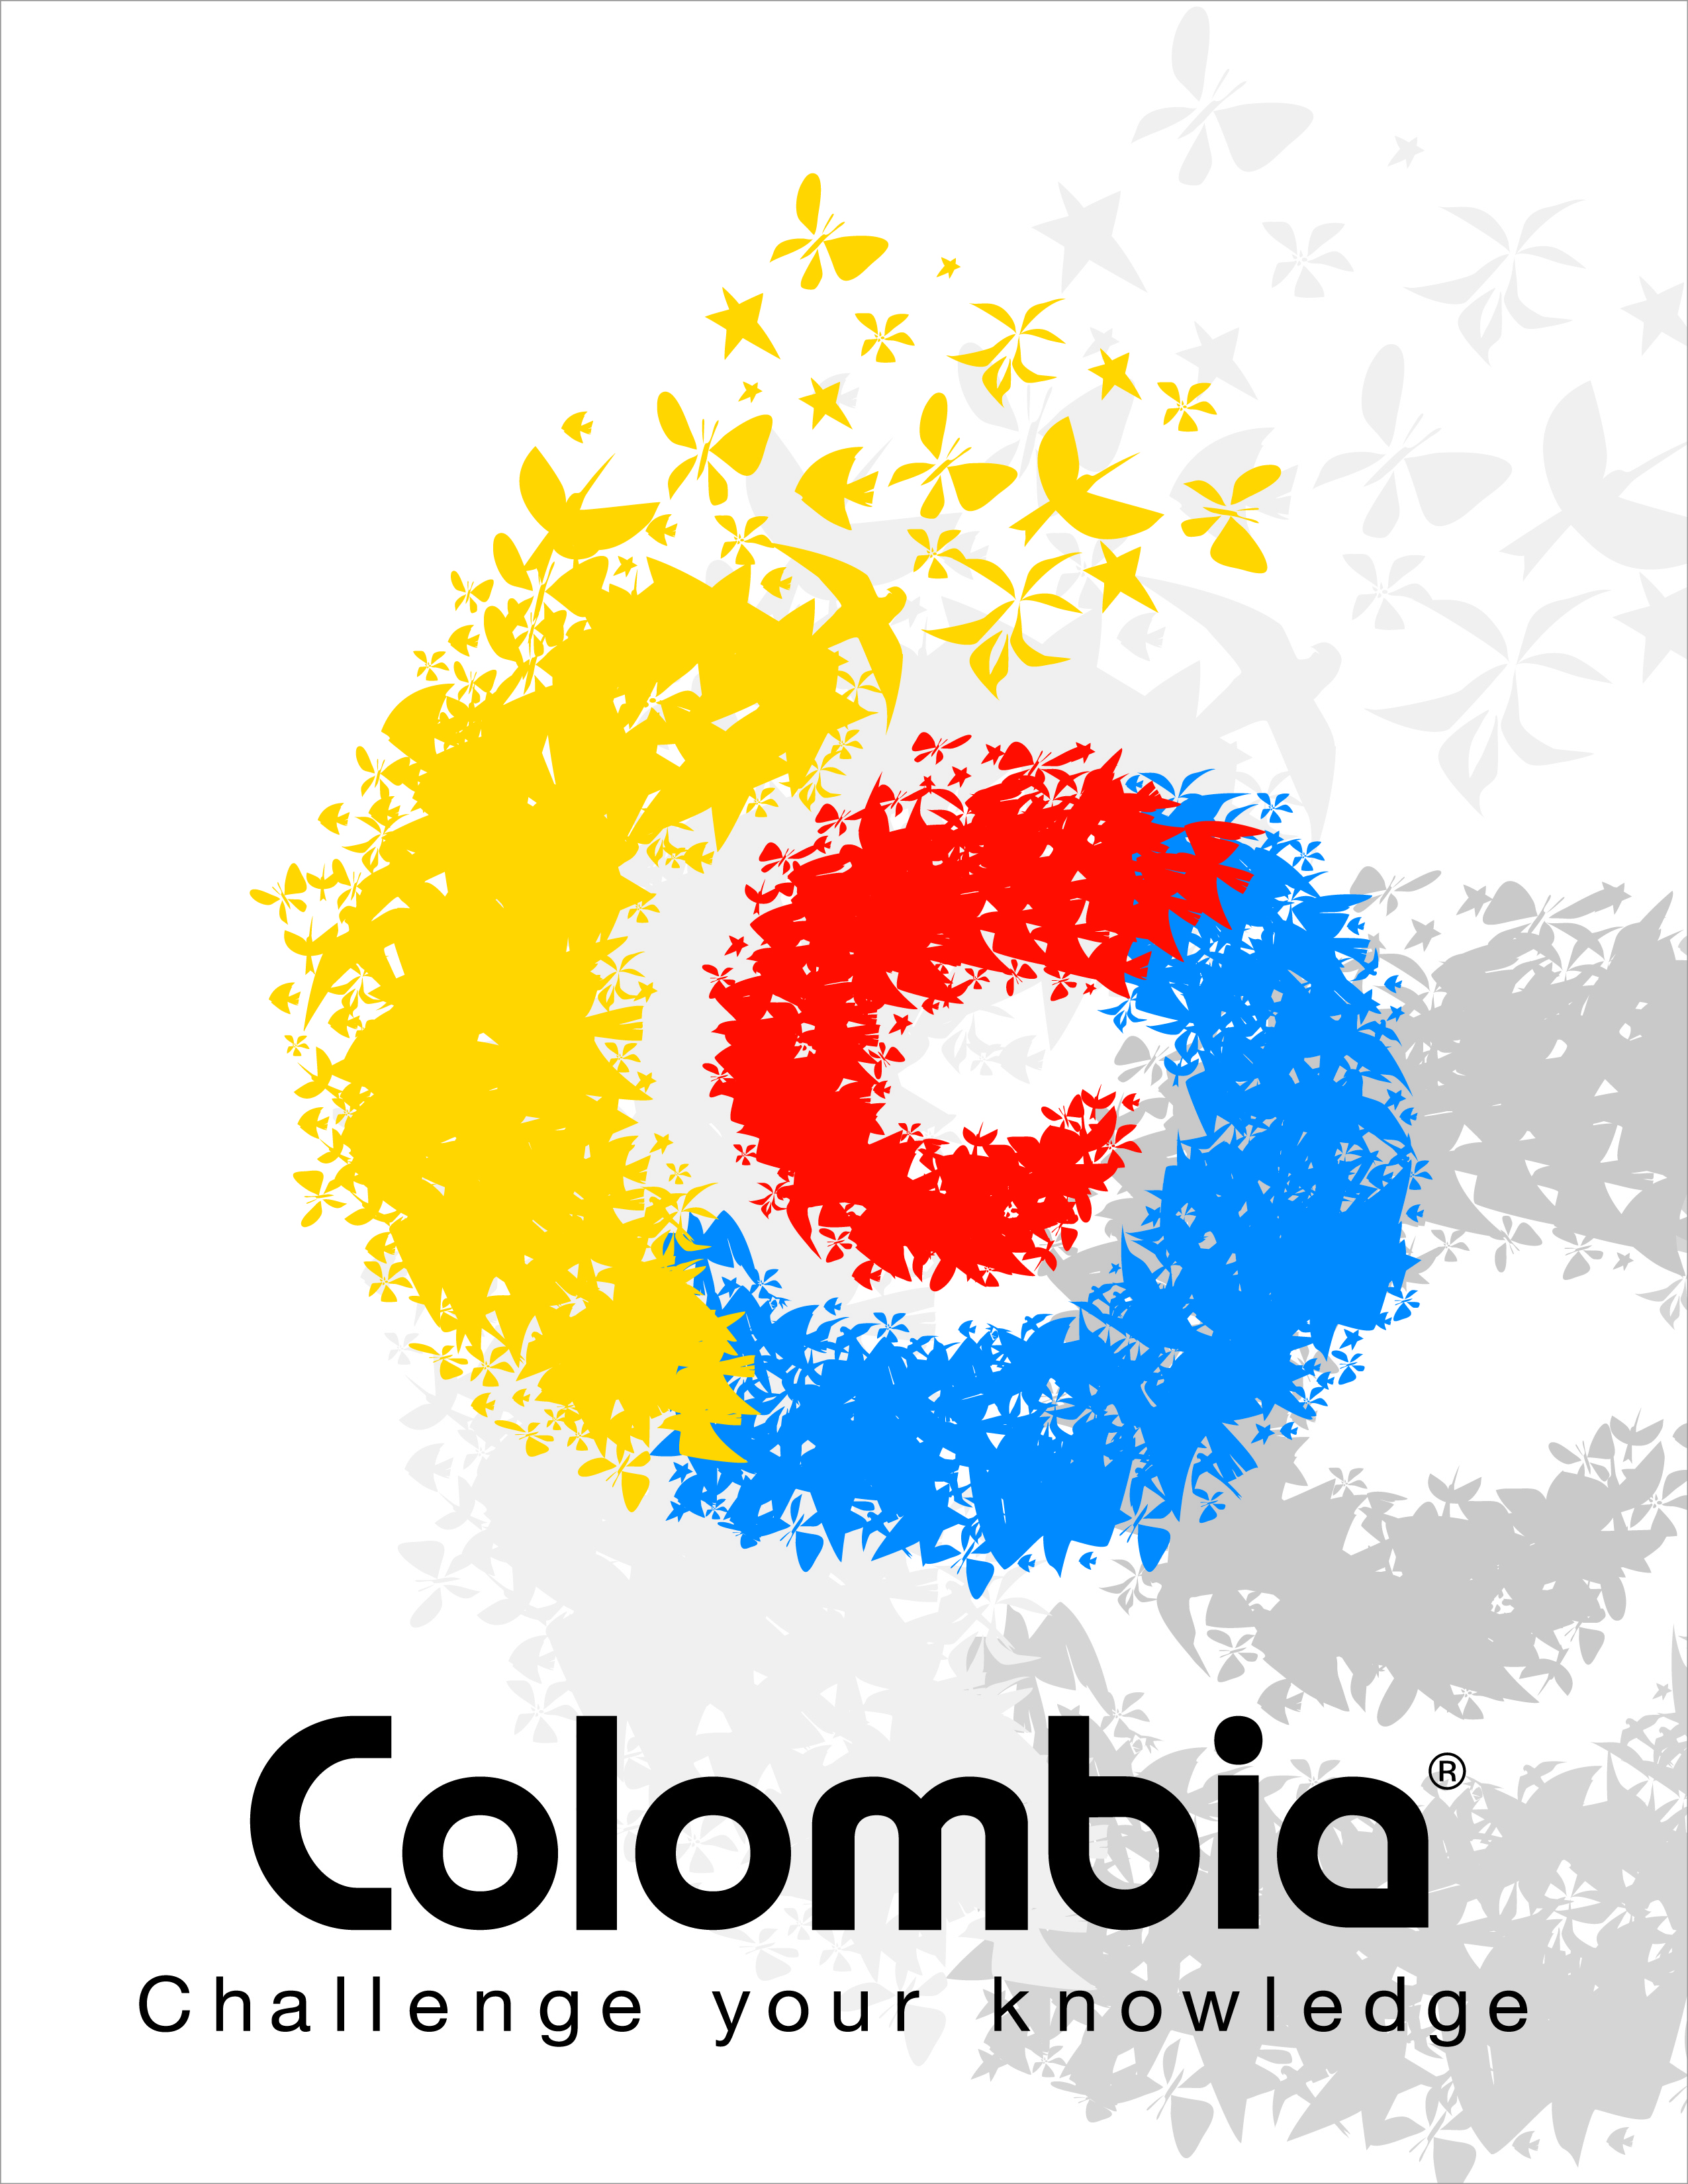 COLOMBIA CHALLENGE YOUR KNOWLEDGE